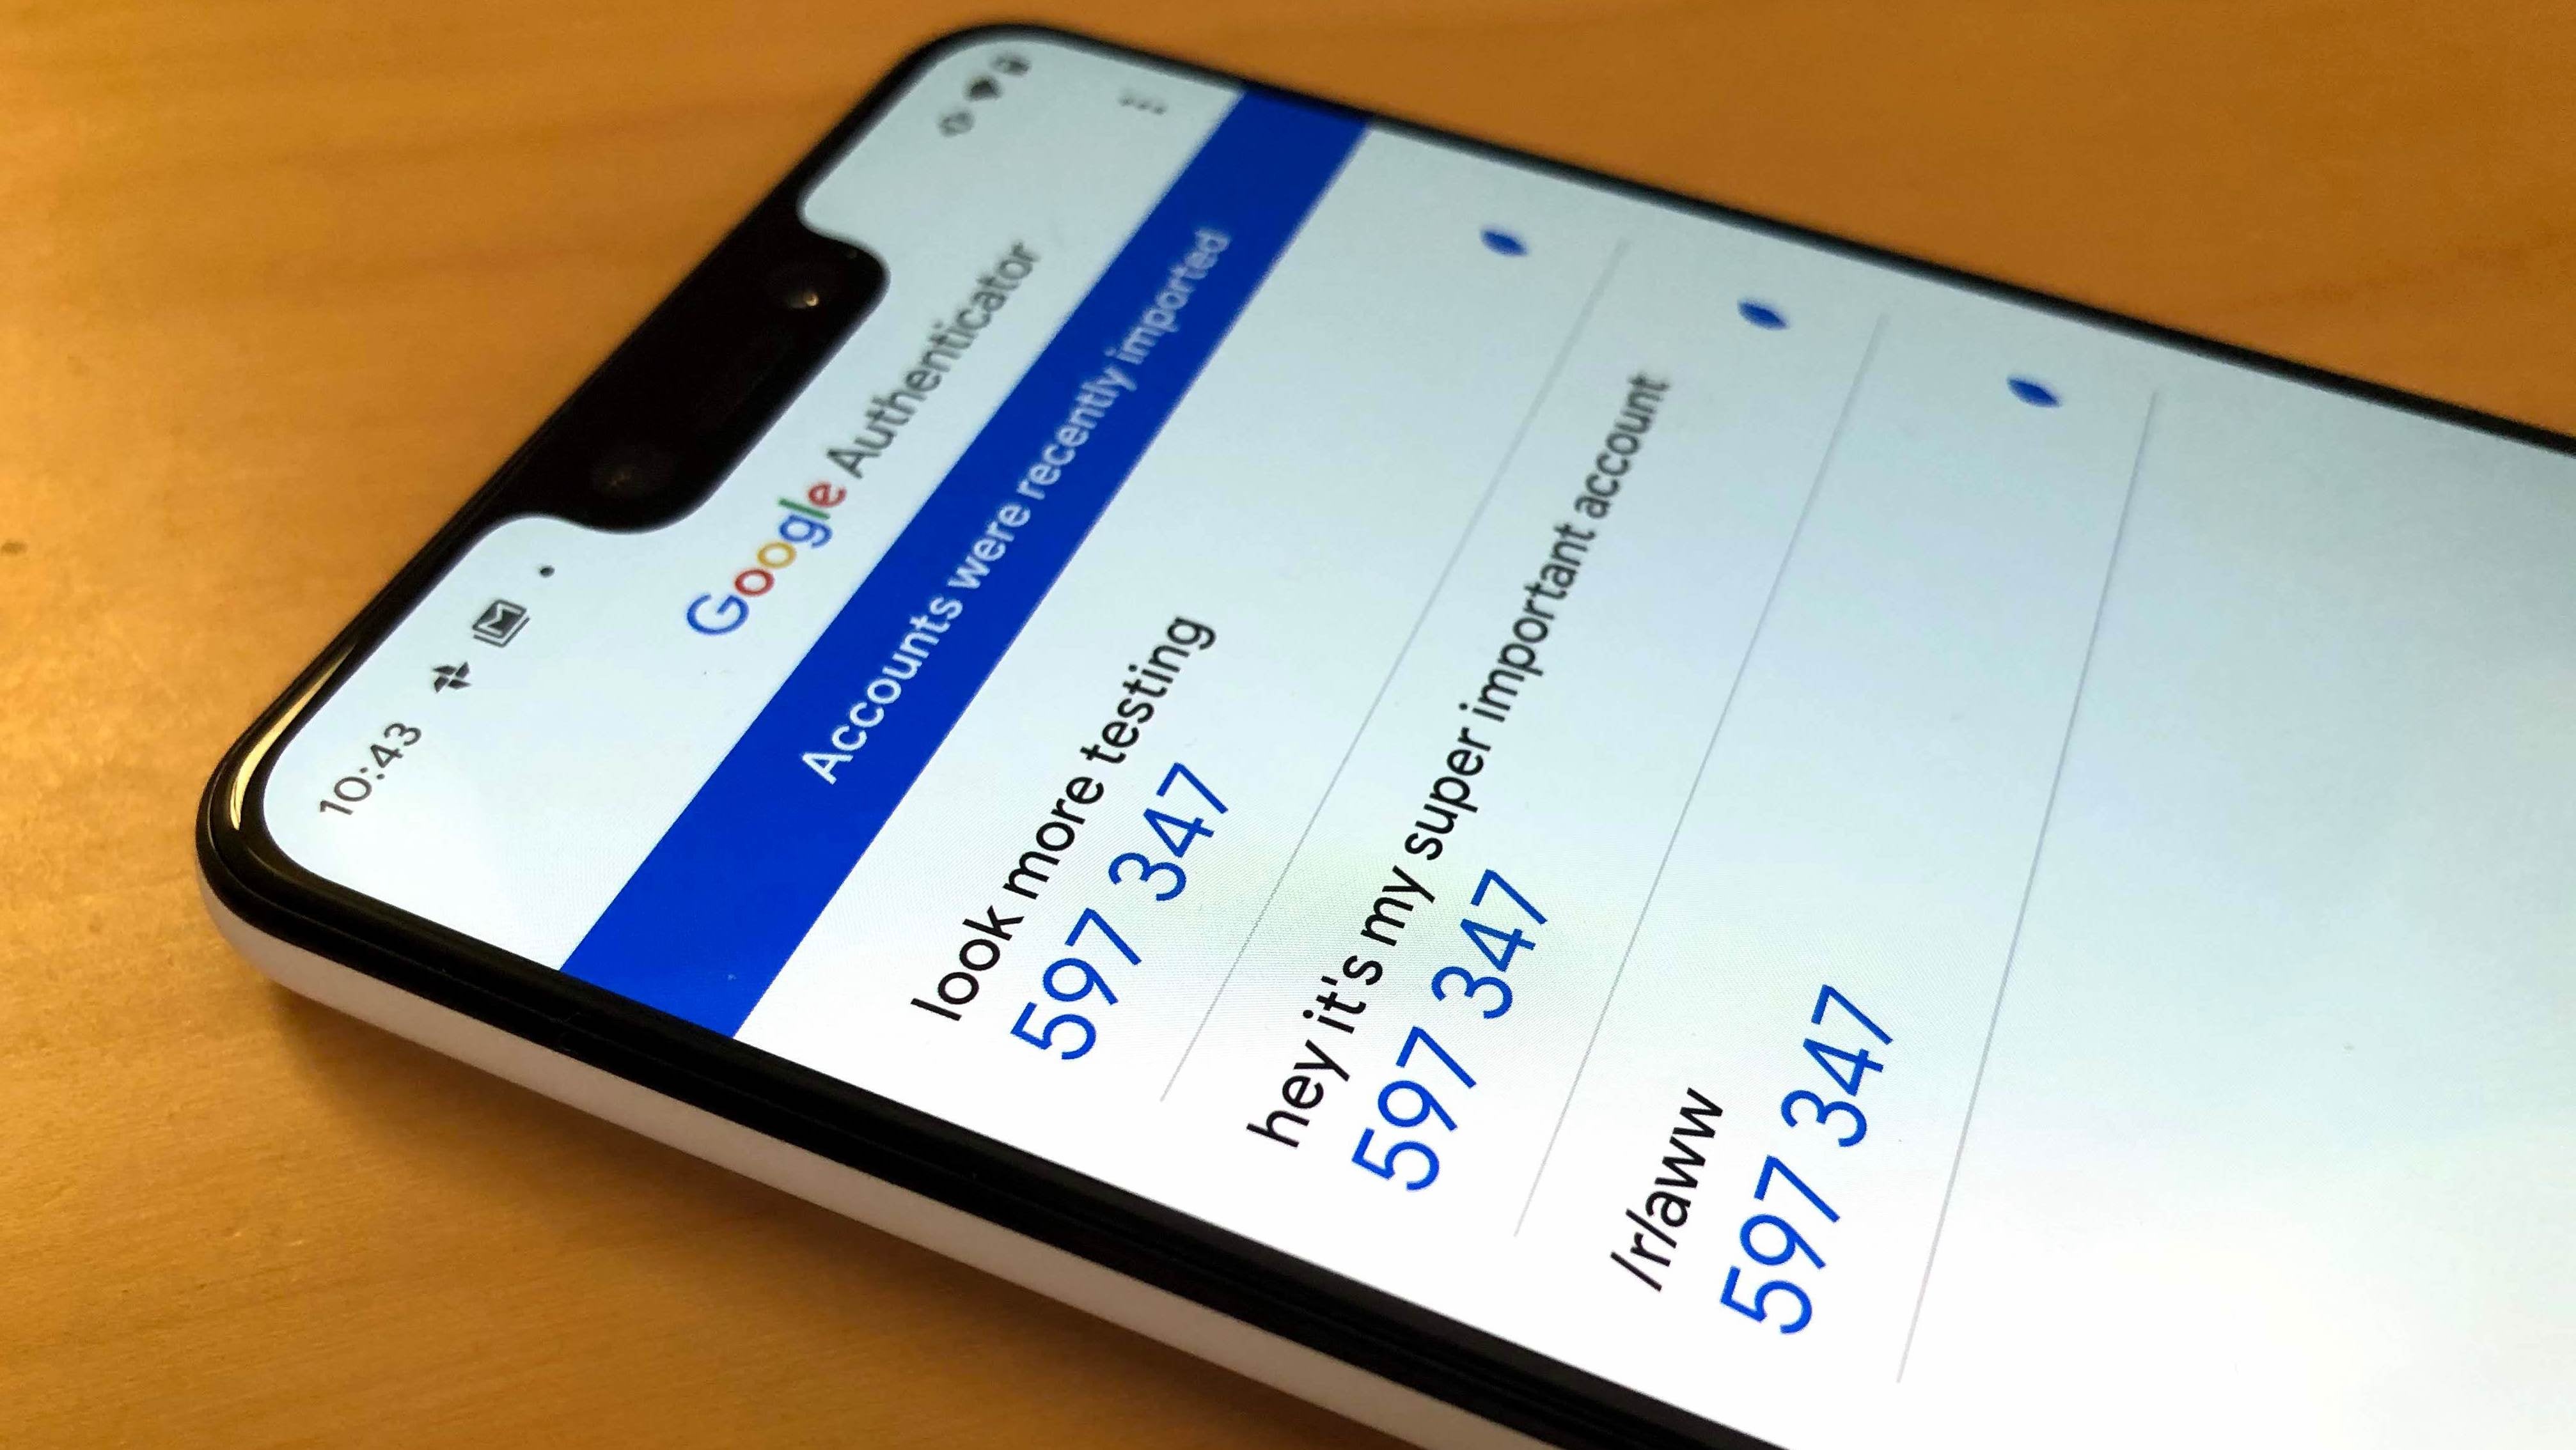 how to transfer google authenticator to